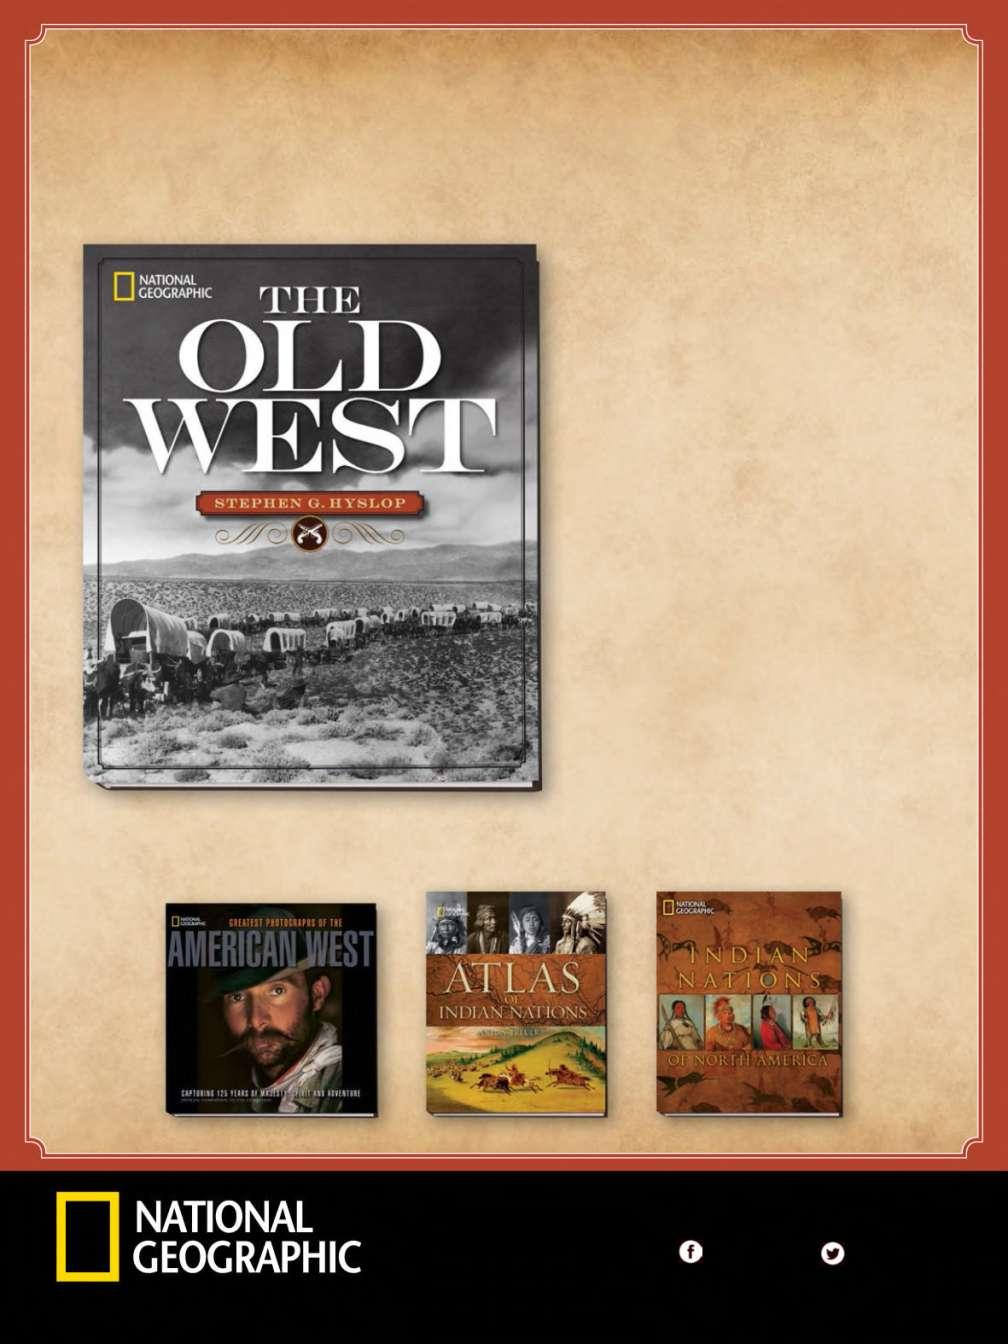 AN EPIC BOOK FOR AN EPIC ERA F rom the gold rush and land rush to cowboys and Indians to ranchers and loggers, the iconic story of the American West endures through the decades and continues to